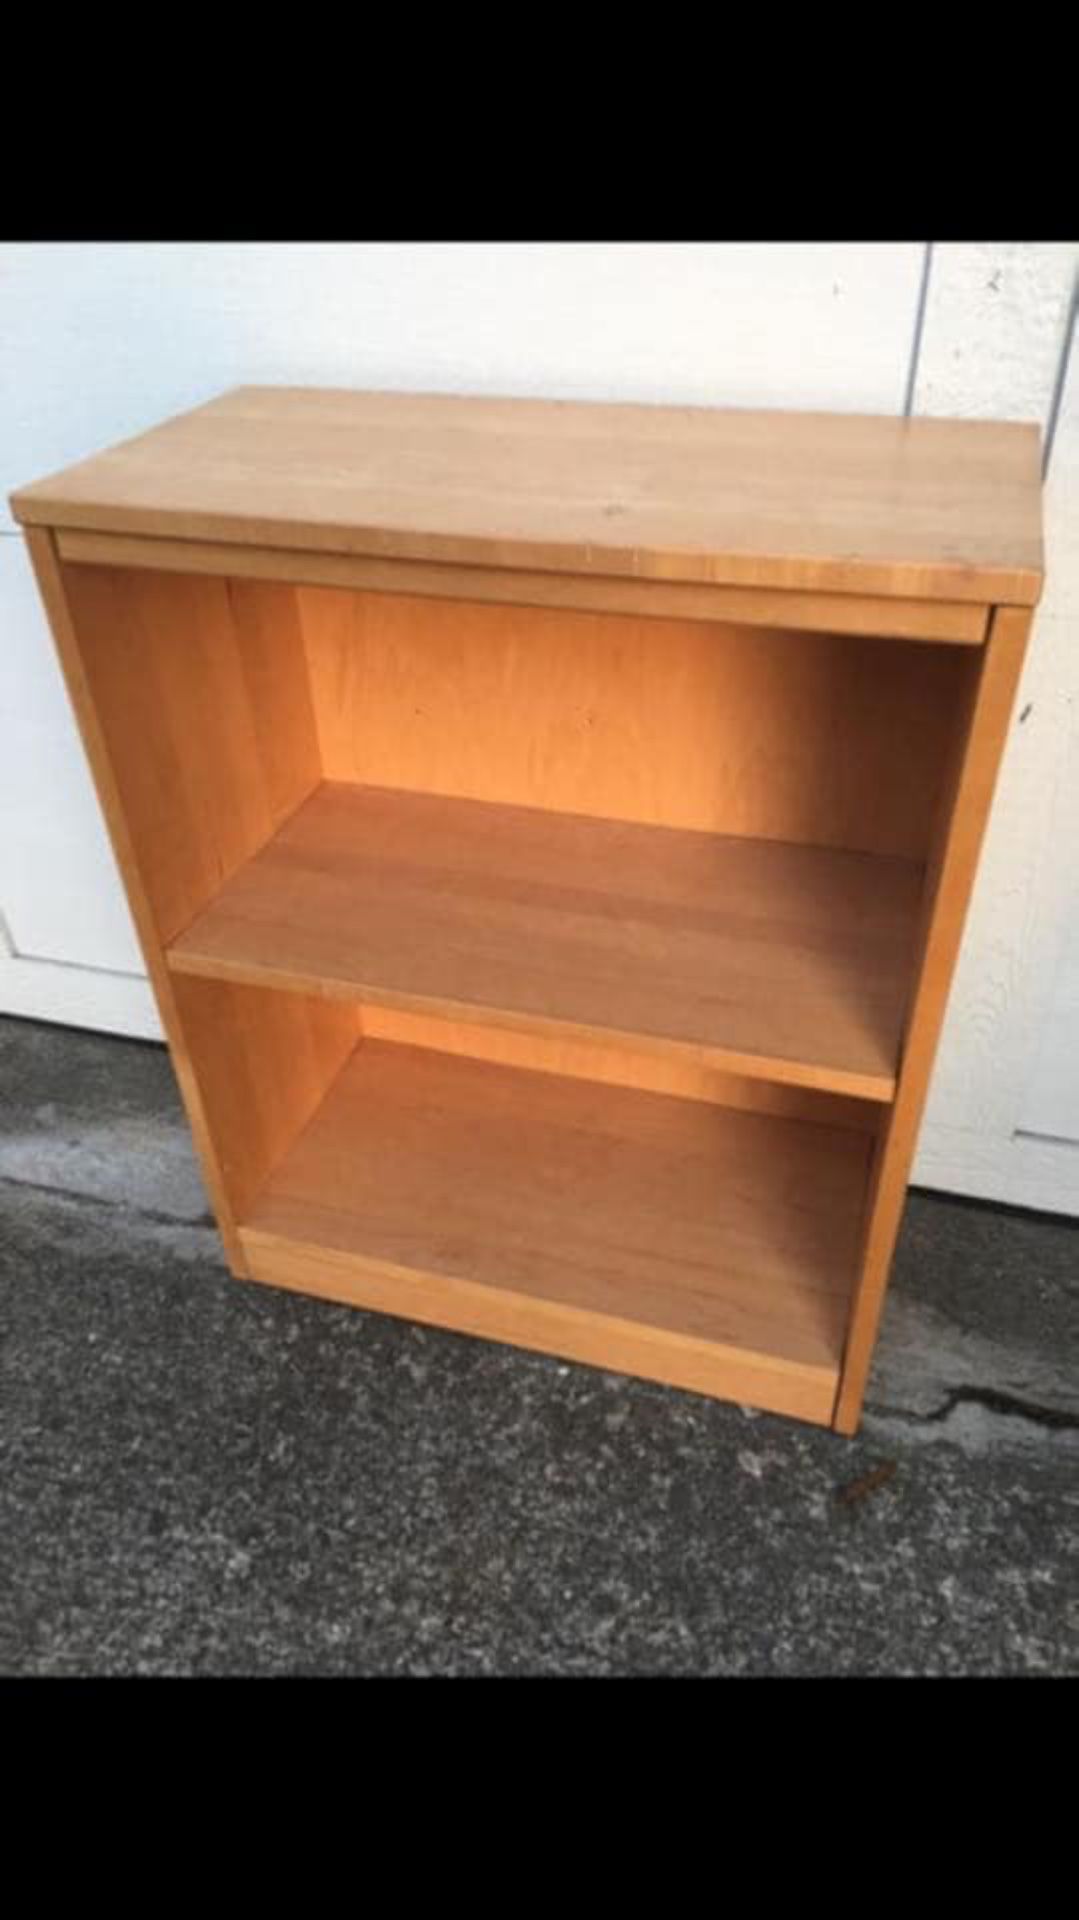 Solid wood shelve/ tv stand Very Sturdy 24“ x 12“ x 30“